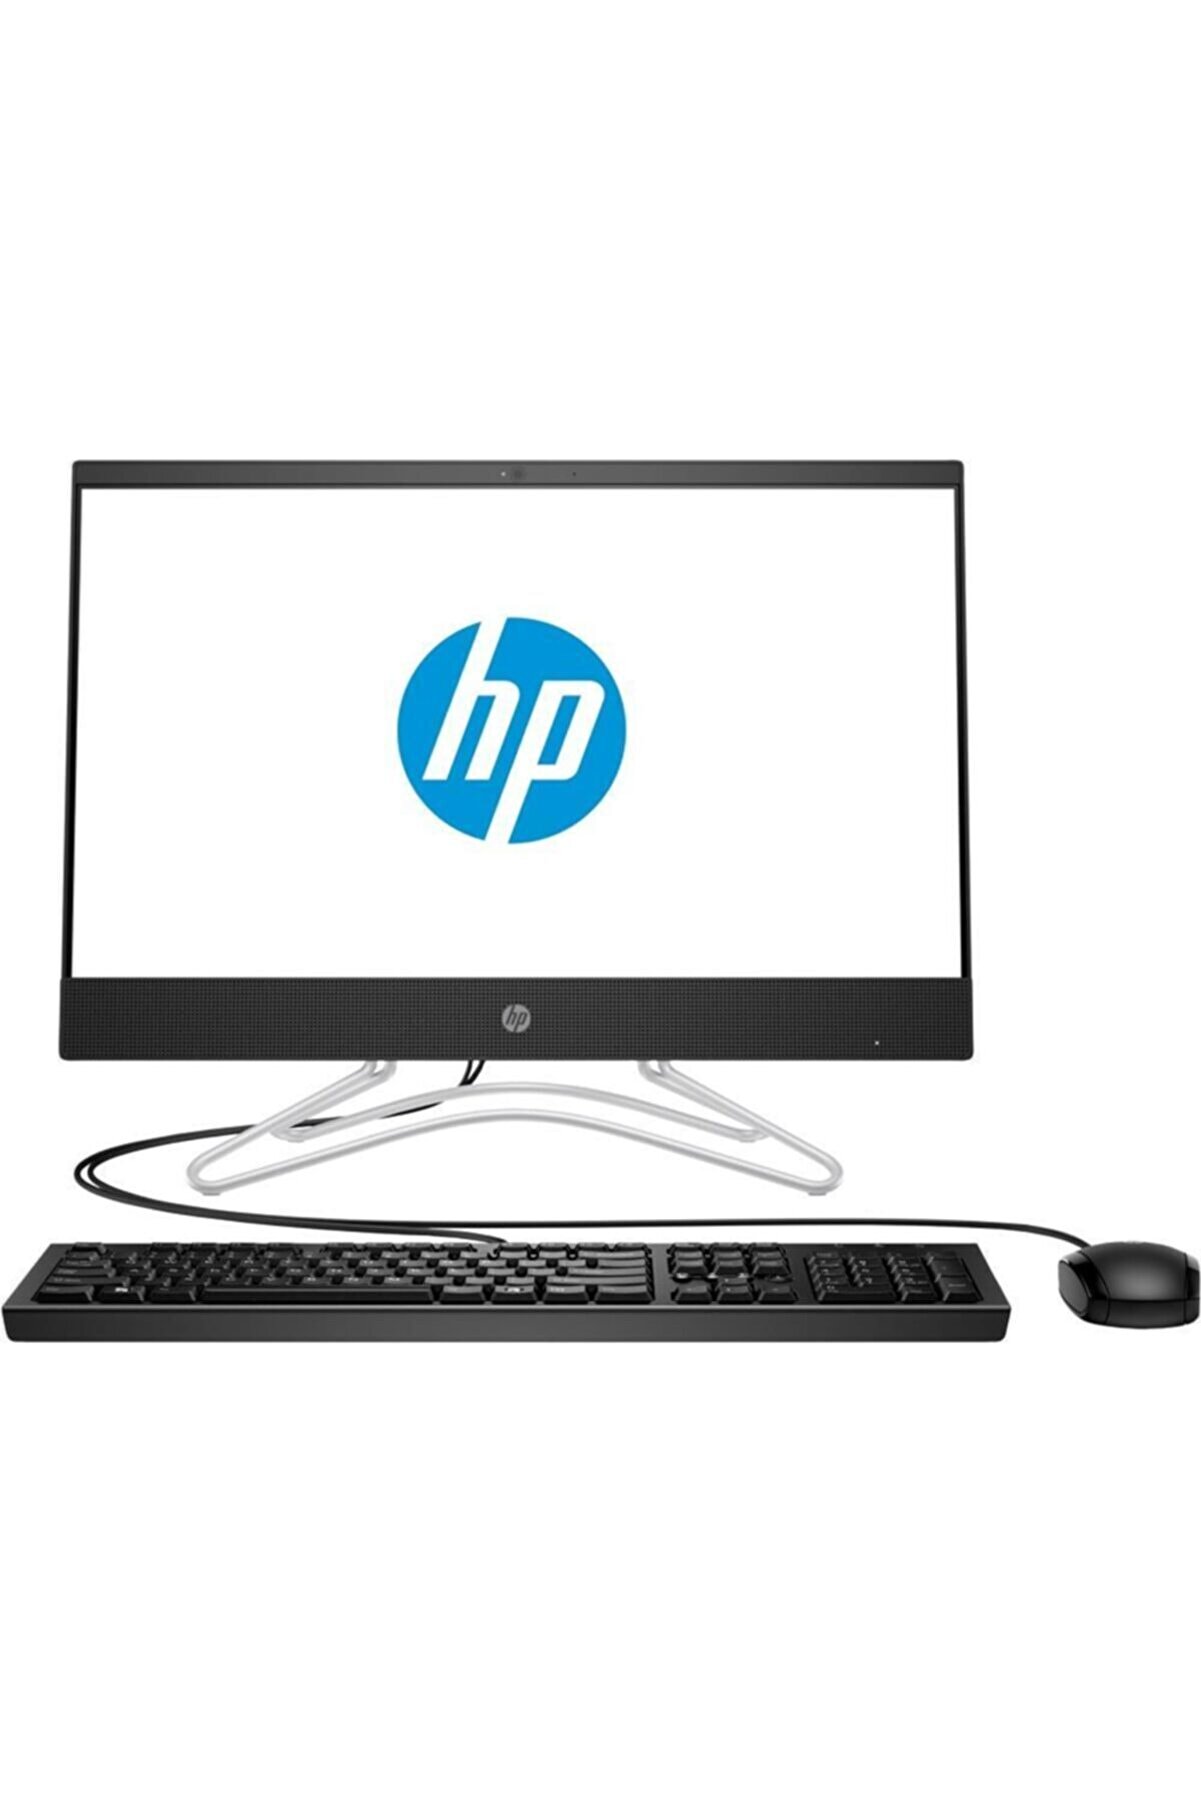 HP 22-c0083nt 9ey89ea04 I7-9700t 16gb 1tbssd 2gb 21.5" Fullhd Freedos All In One